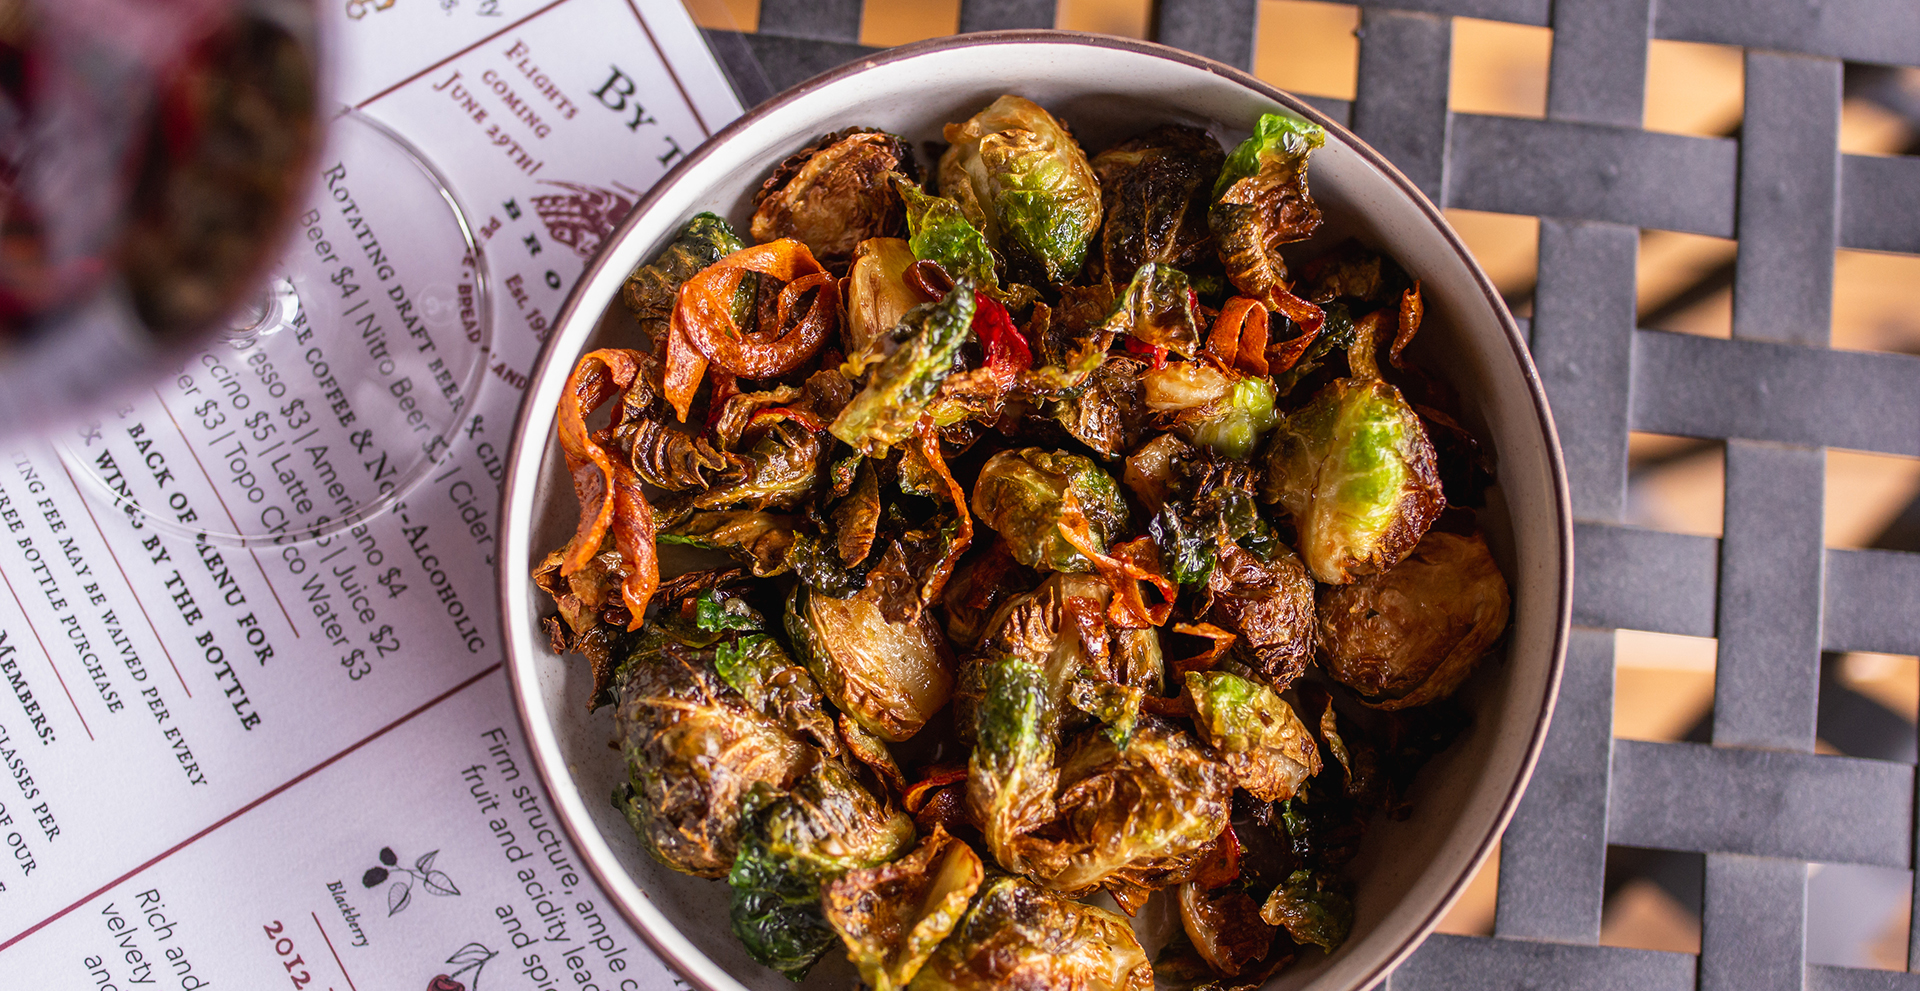 Chef Norma’s famous brussels sprouts